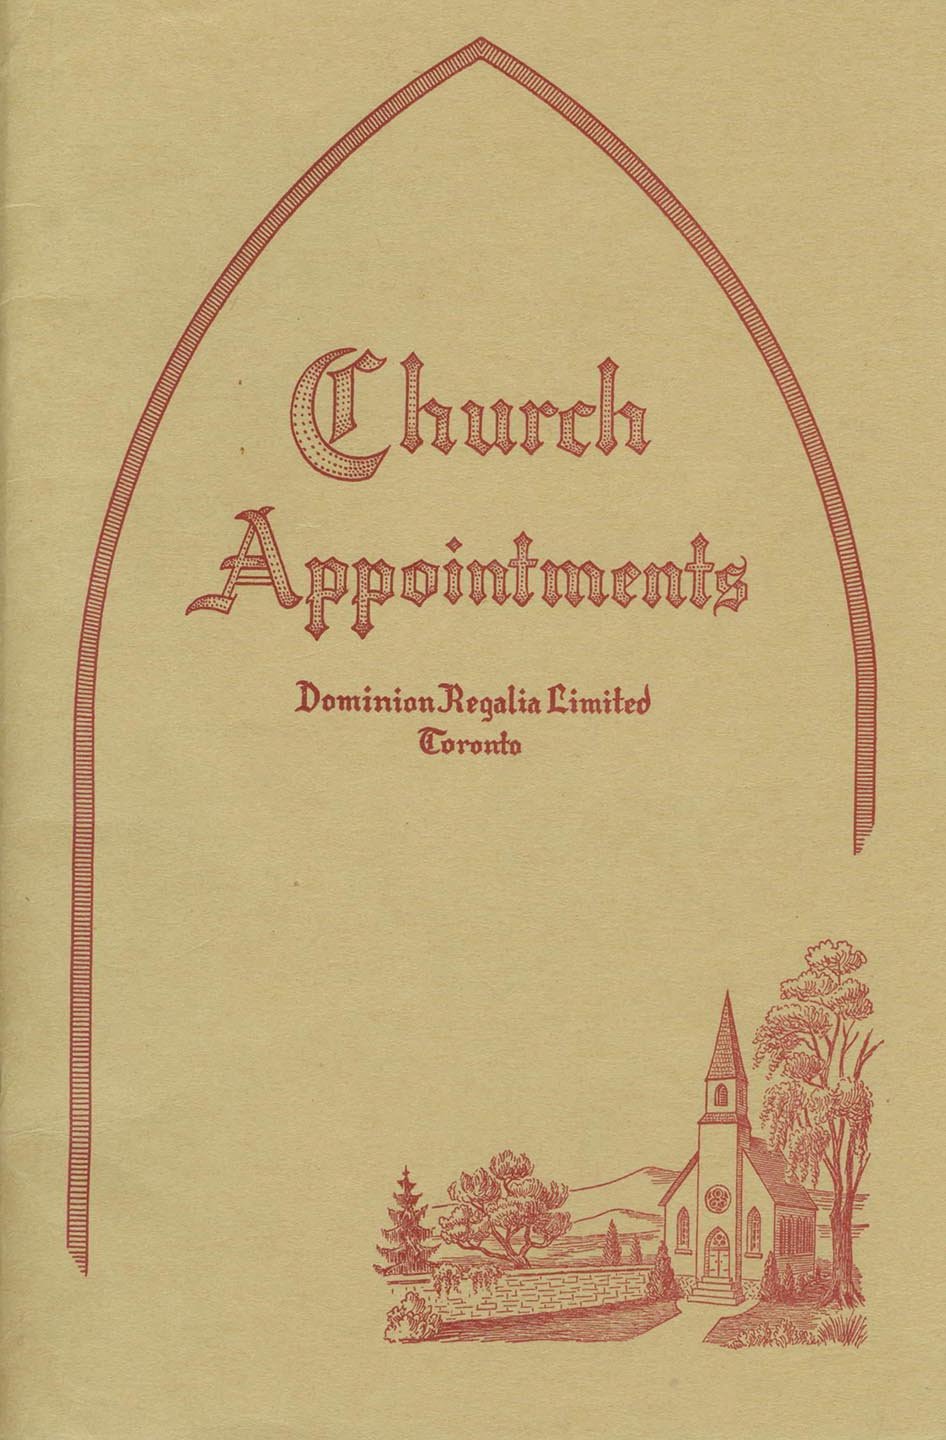 Church Appointments